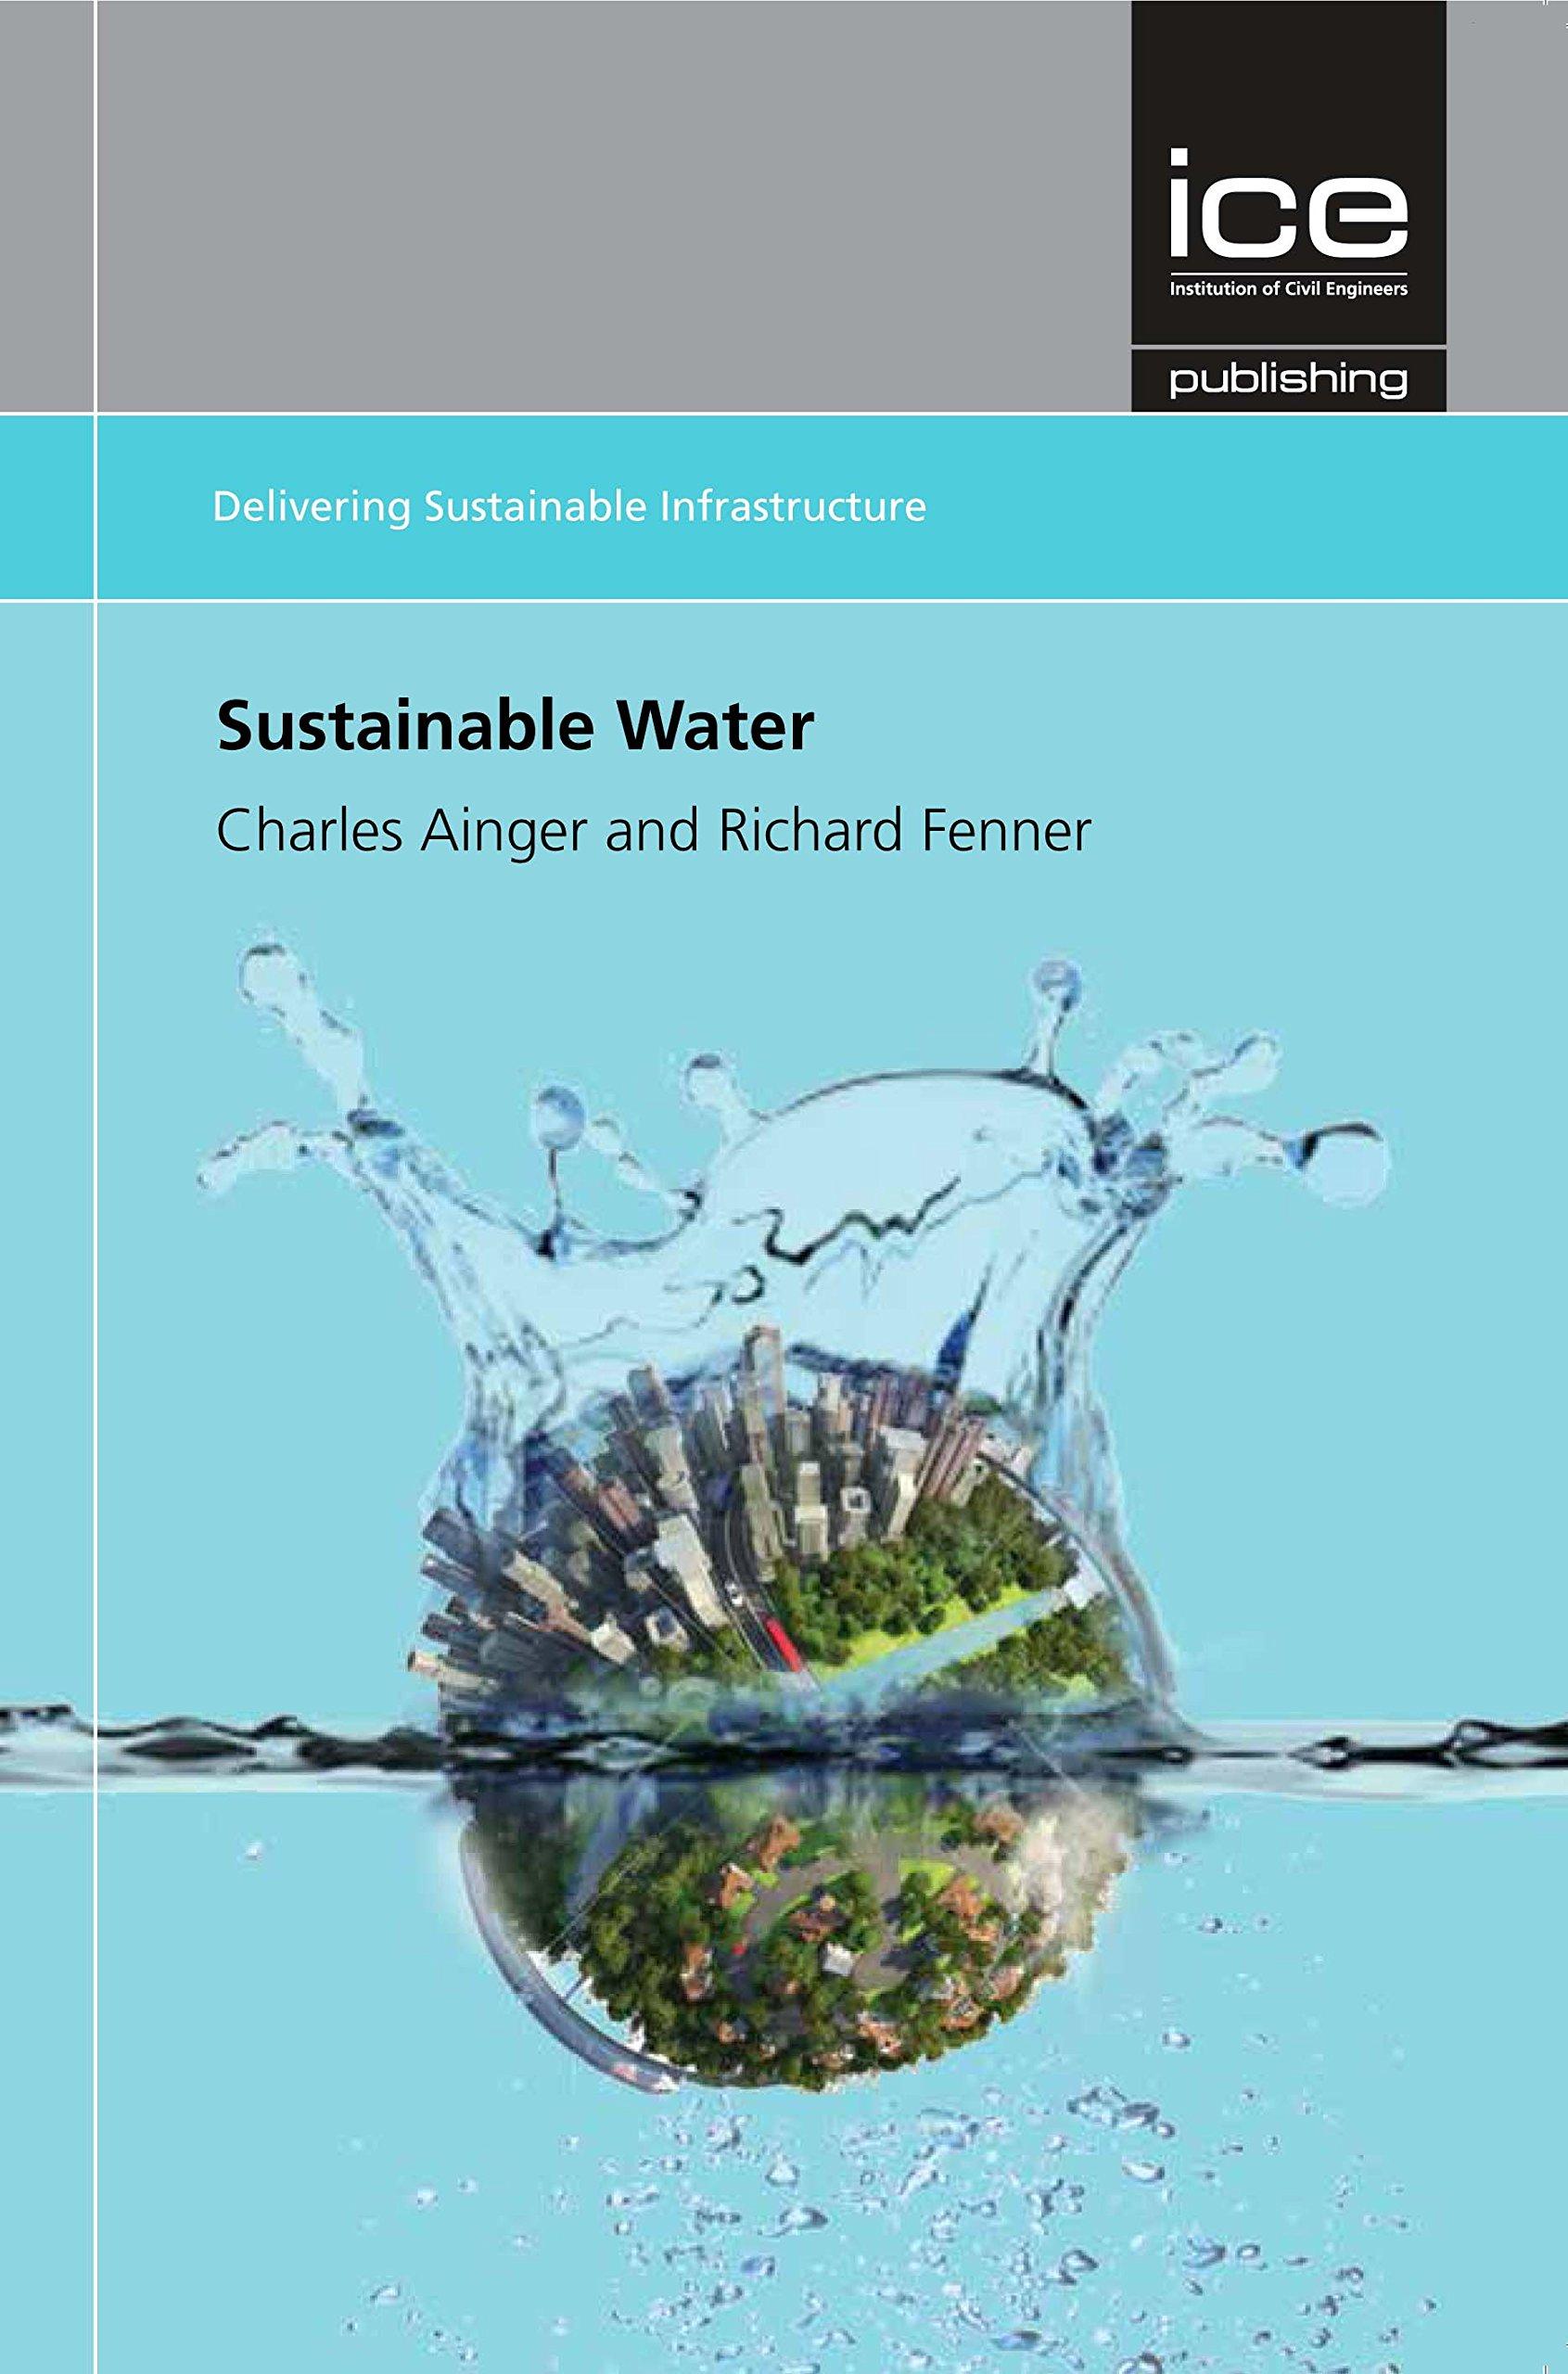 New book on Sustainable Water